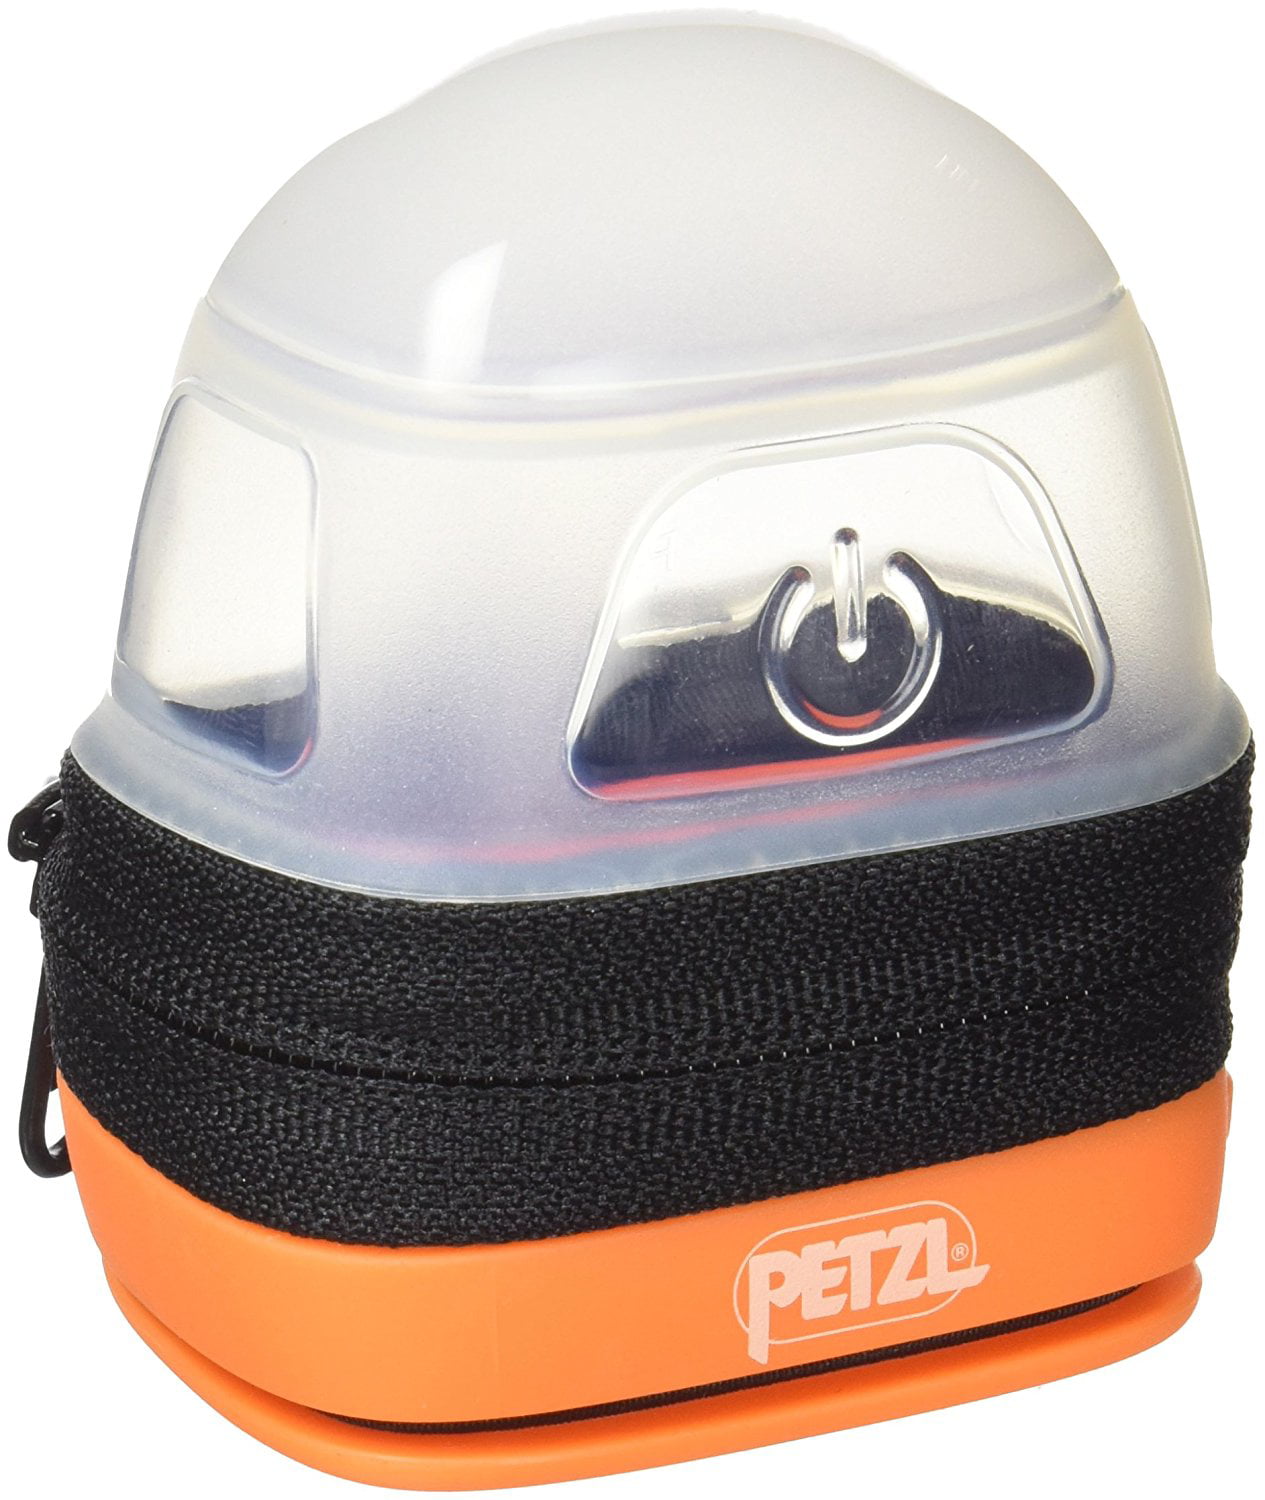 Petzl Noctilight Protective Carrying Case for Headlamps SS17 